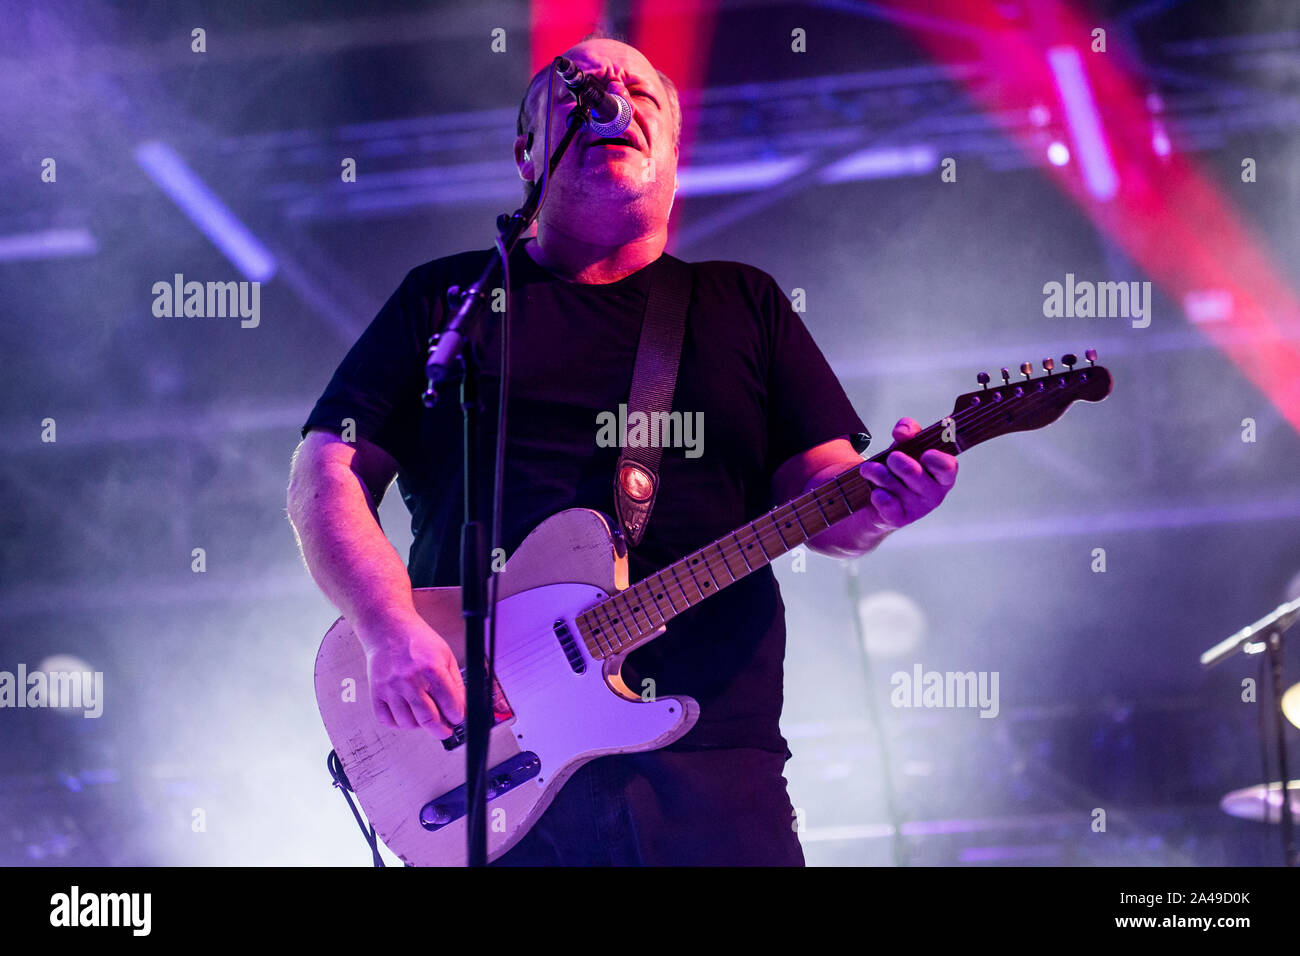 Turin Italy 12 october 2019 Pixies performing live at OGR © Roberto Finizio / Alamy Stock Photo